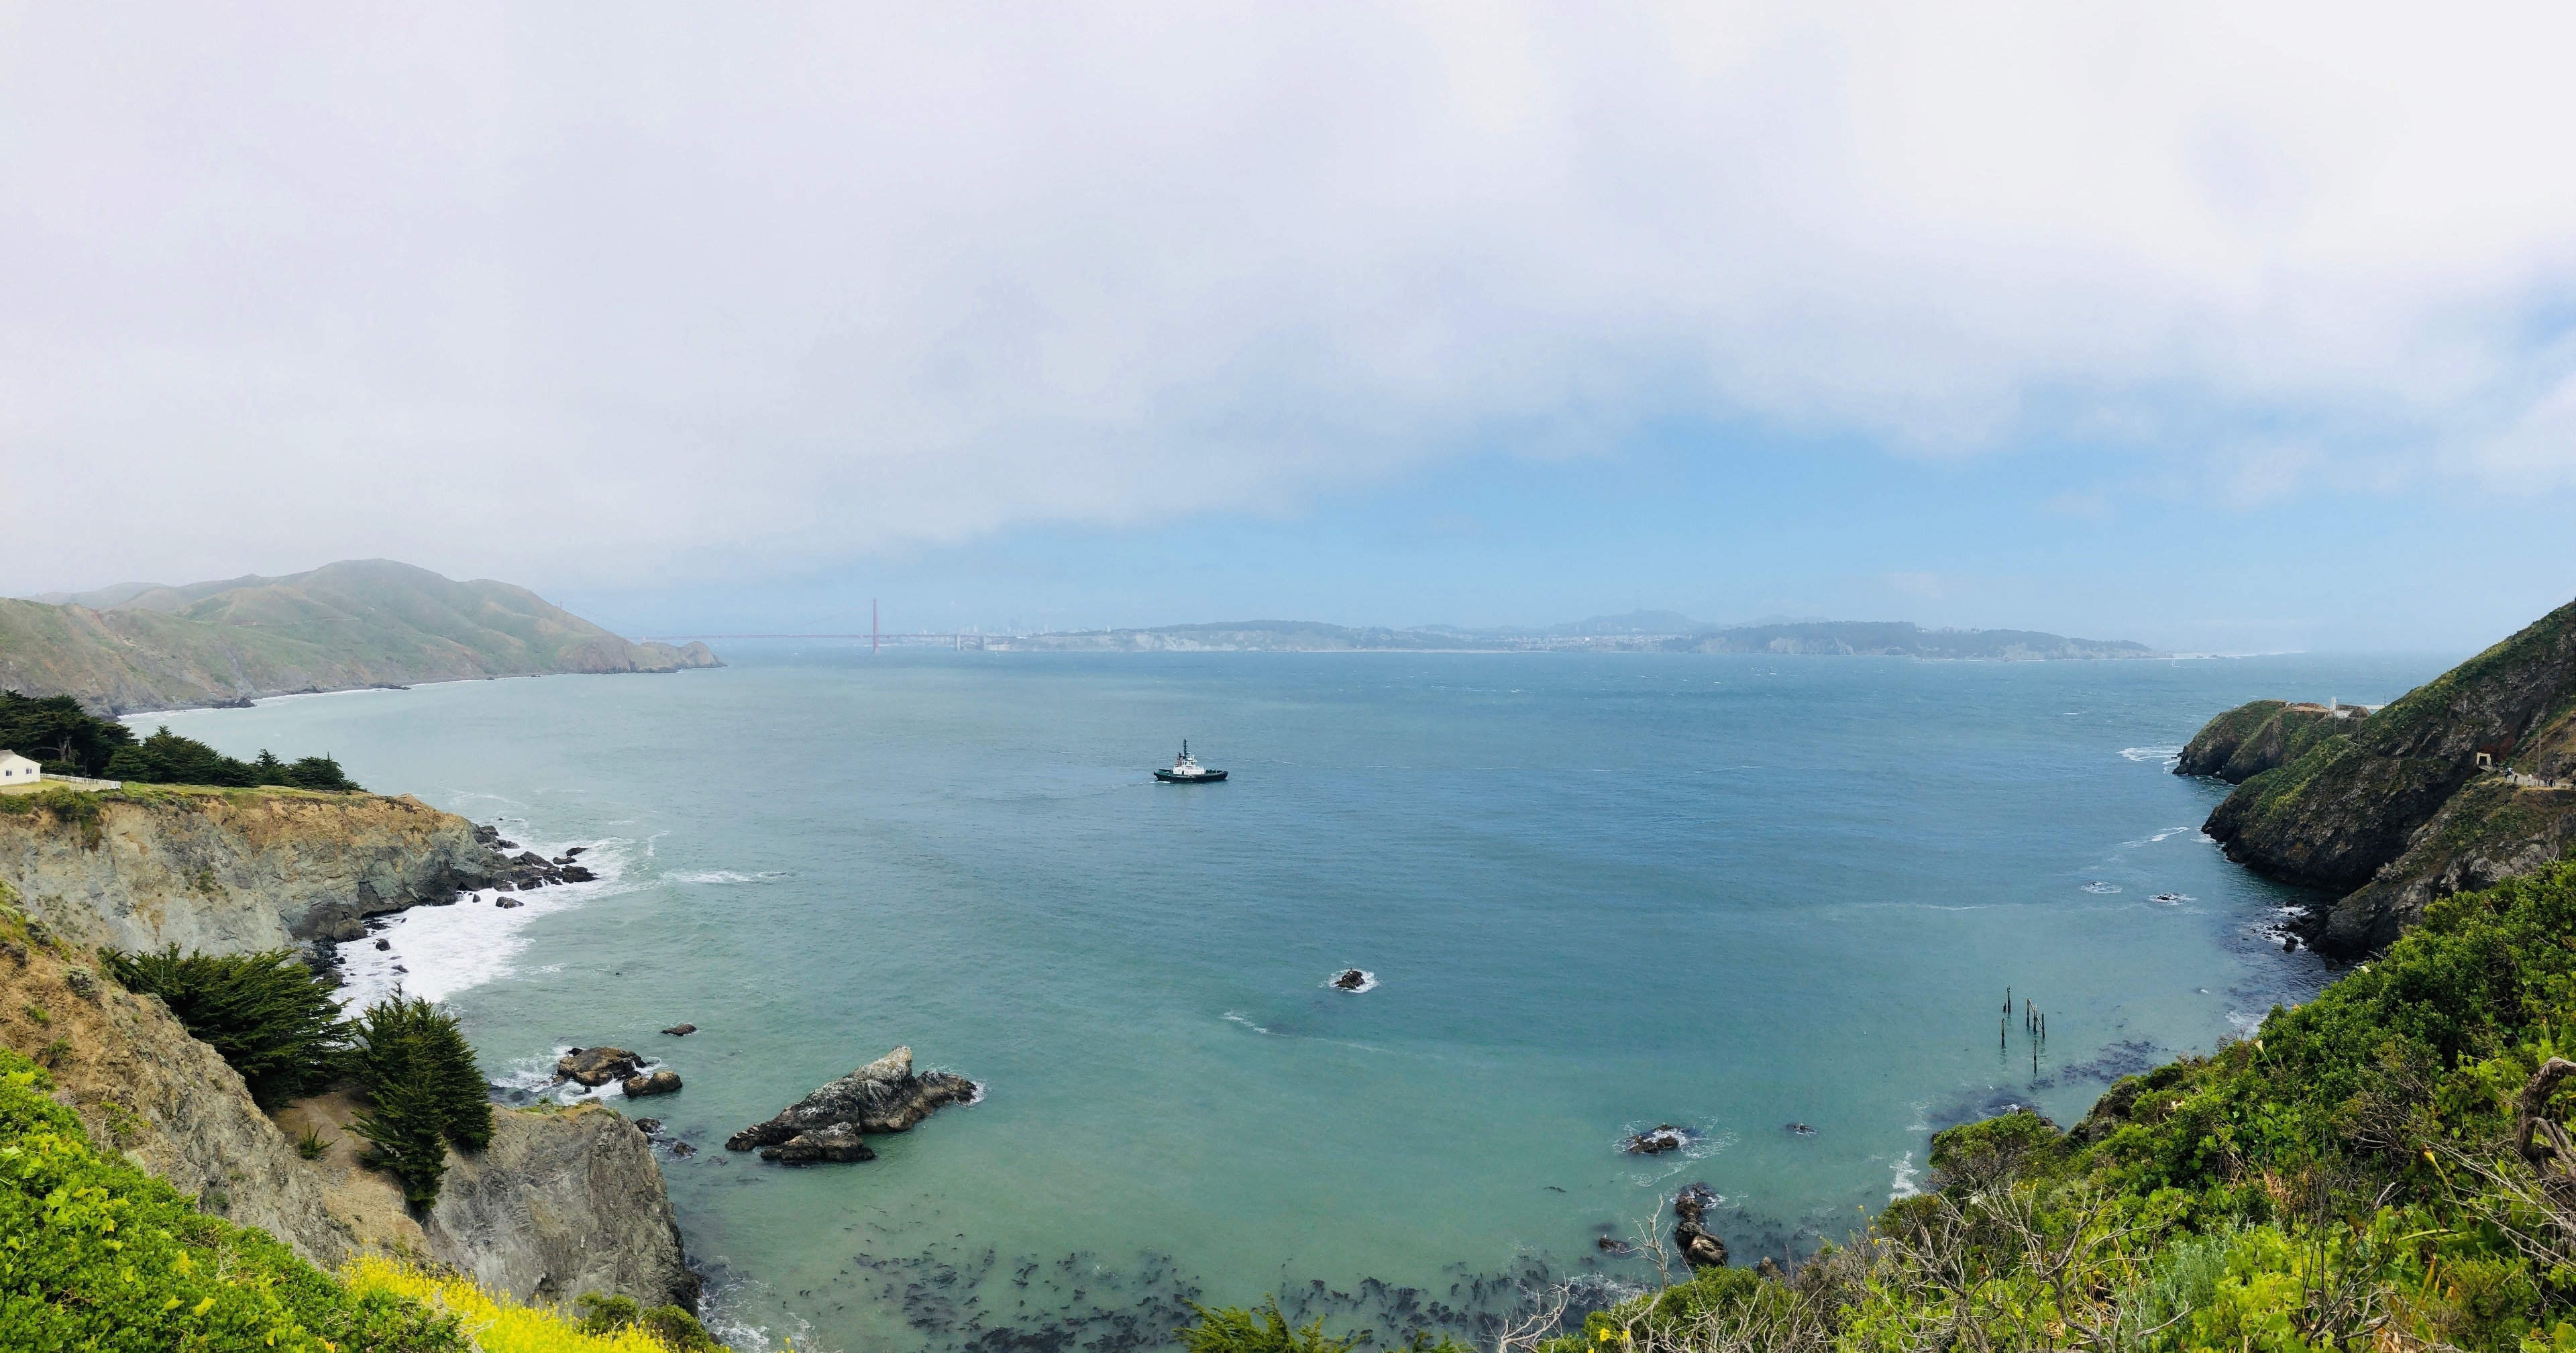 View on the way to Point Bonita Light House. (Heads up: It's only open on Sunday from 12:30-3:30)